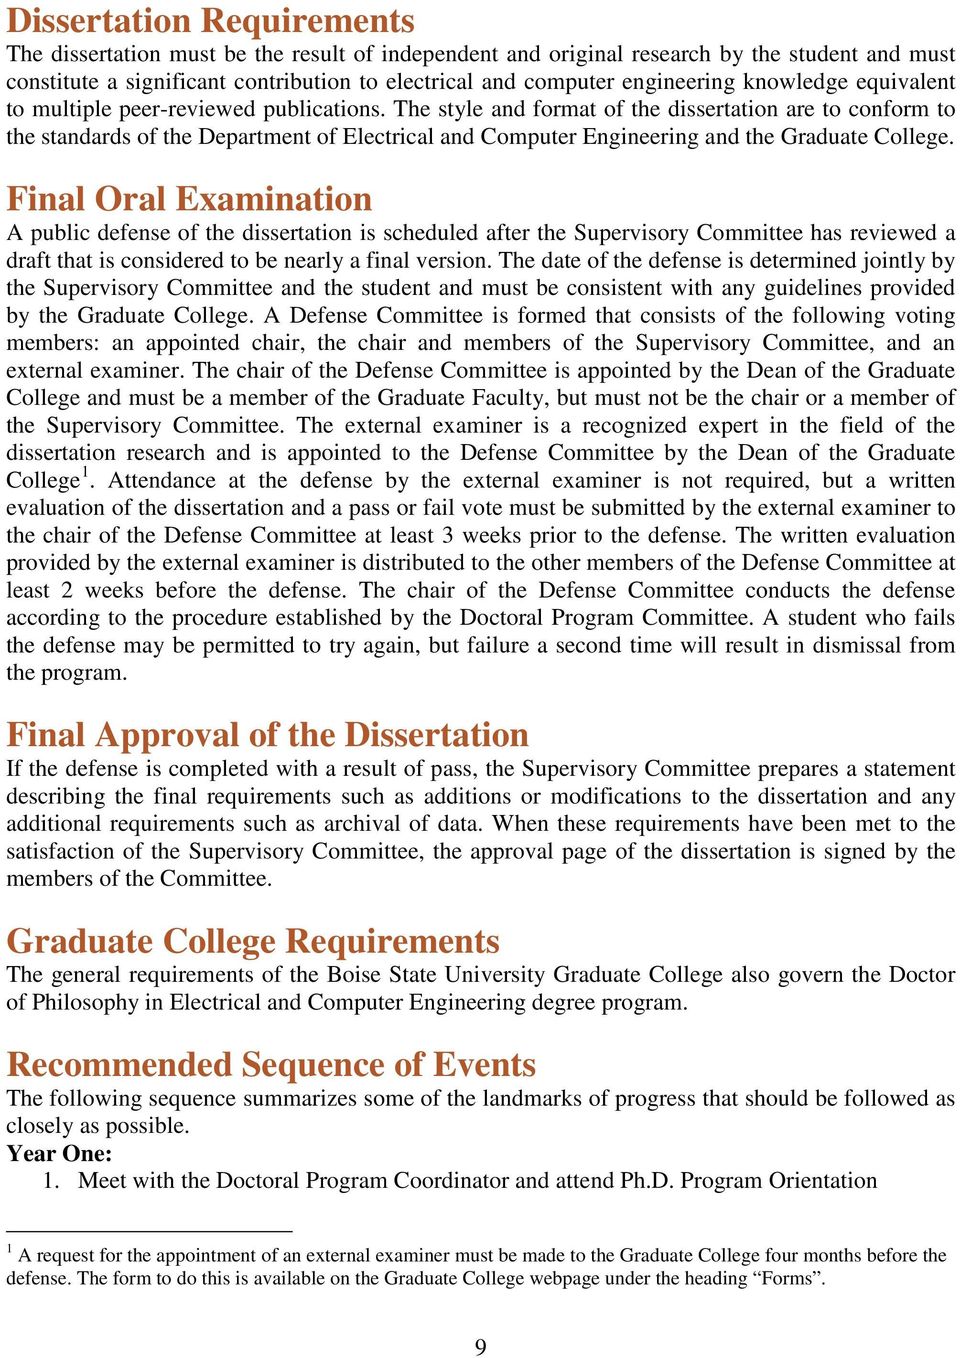 The style and format of the dissertation are to conform to the standards of the Department of Electrical and Computer Engineering and the Graduate College.